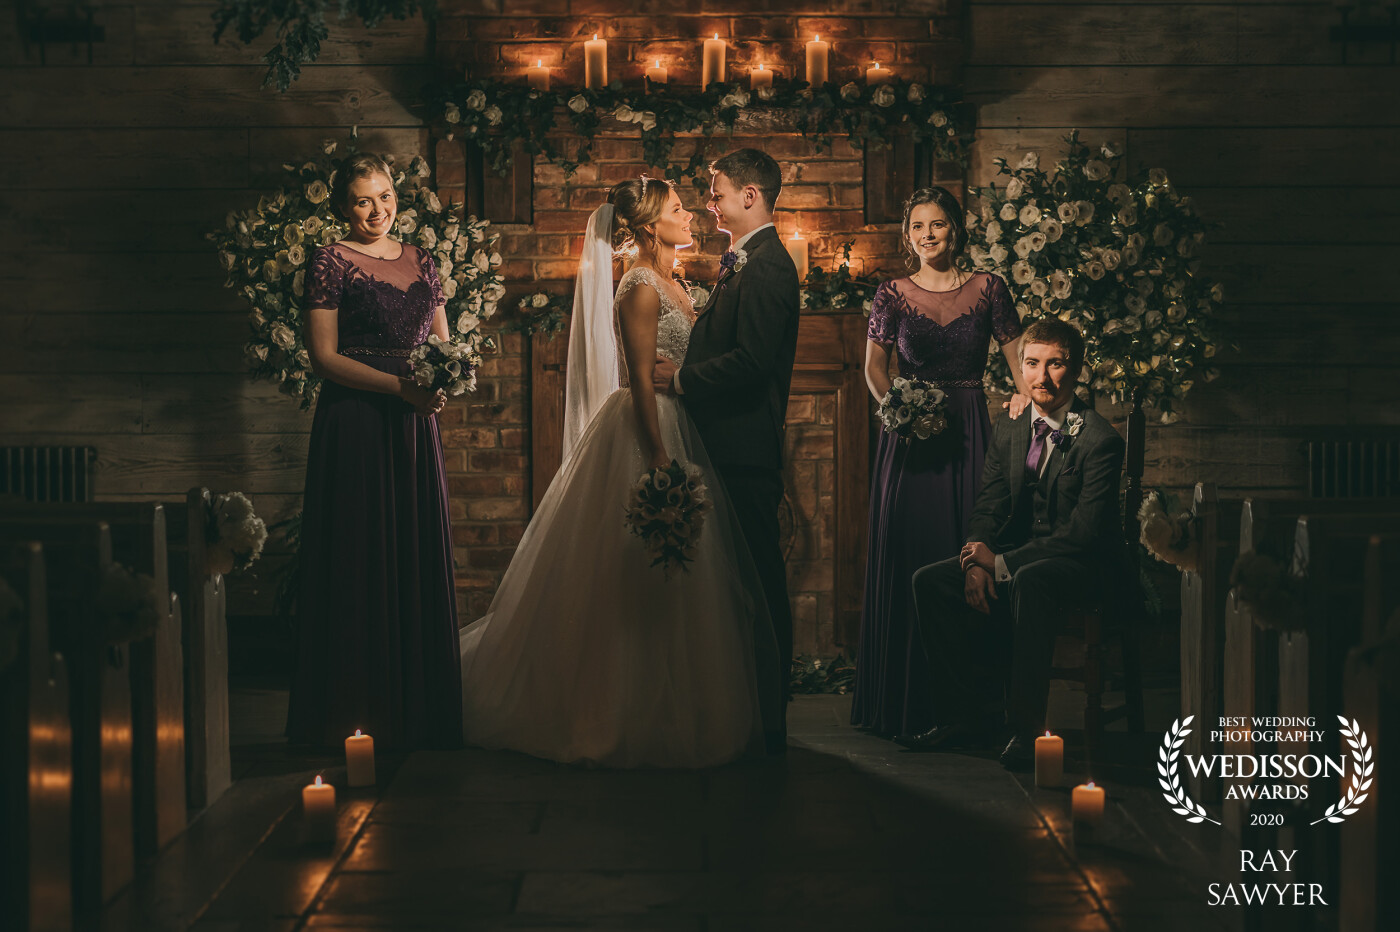 Vanity Fair styled image of the bride and groom with the bridesmaids and best man. Each person lit individually and composited to a final dramatic image. Hope you love it.